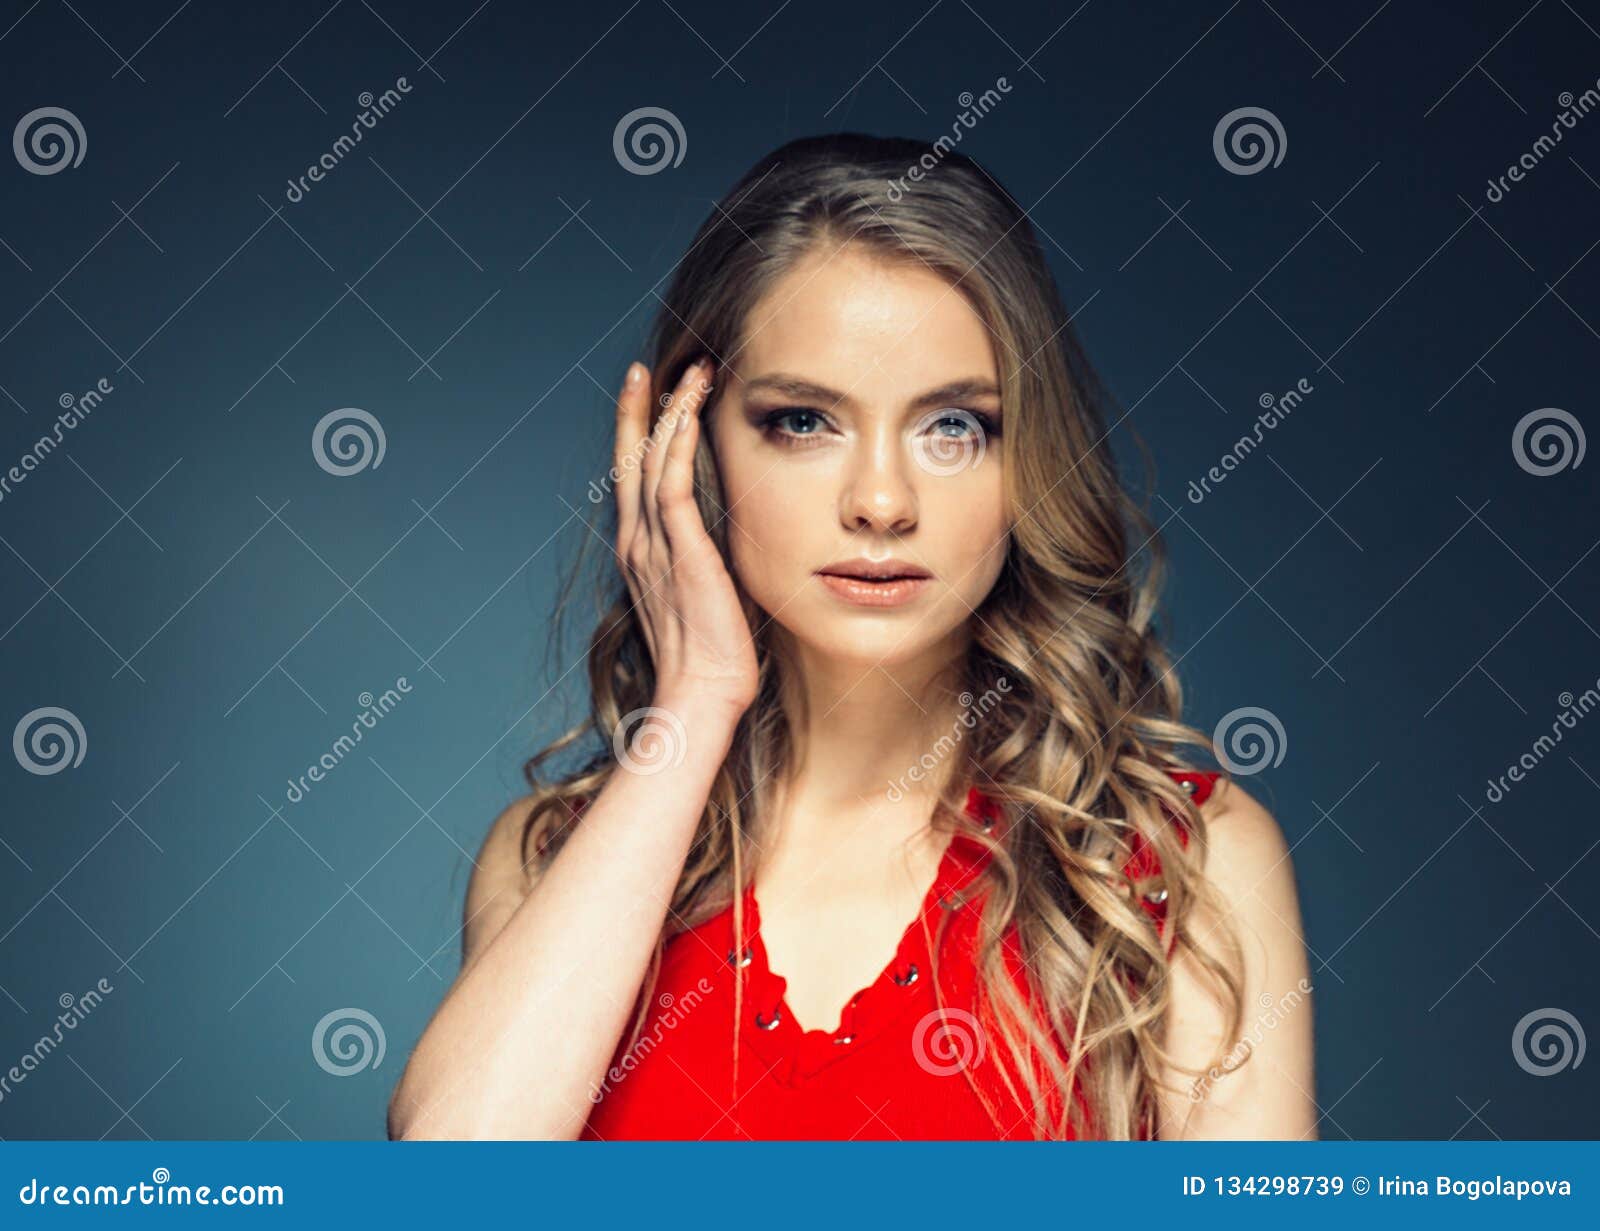 Woman in Red Dress with Long Blonde Hair Stock Image - Image of light ...